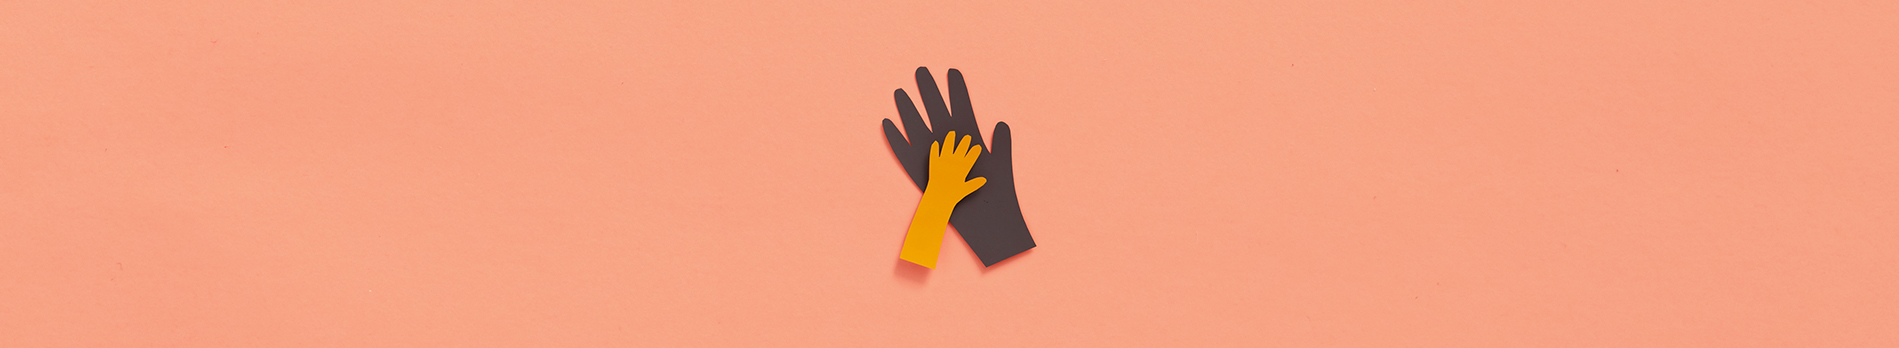 Large and small paper cut hand shapes overlapping on a peach colored background